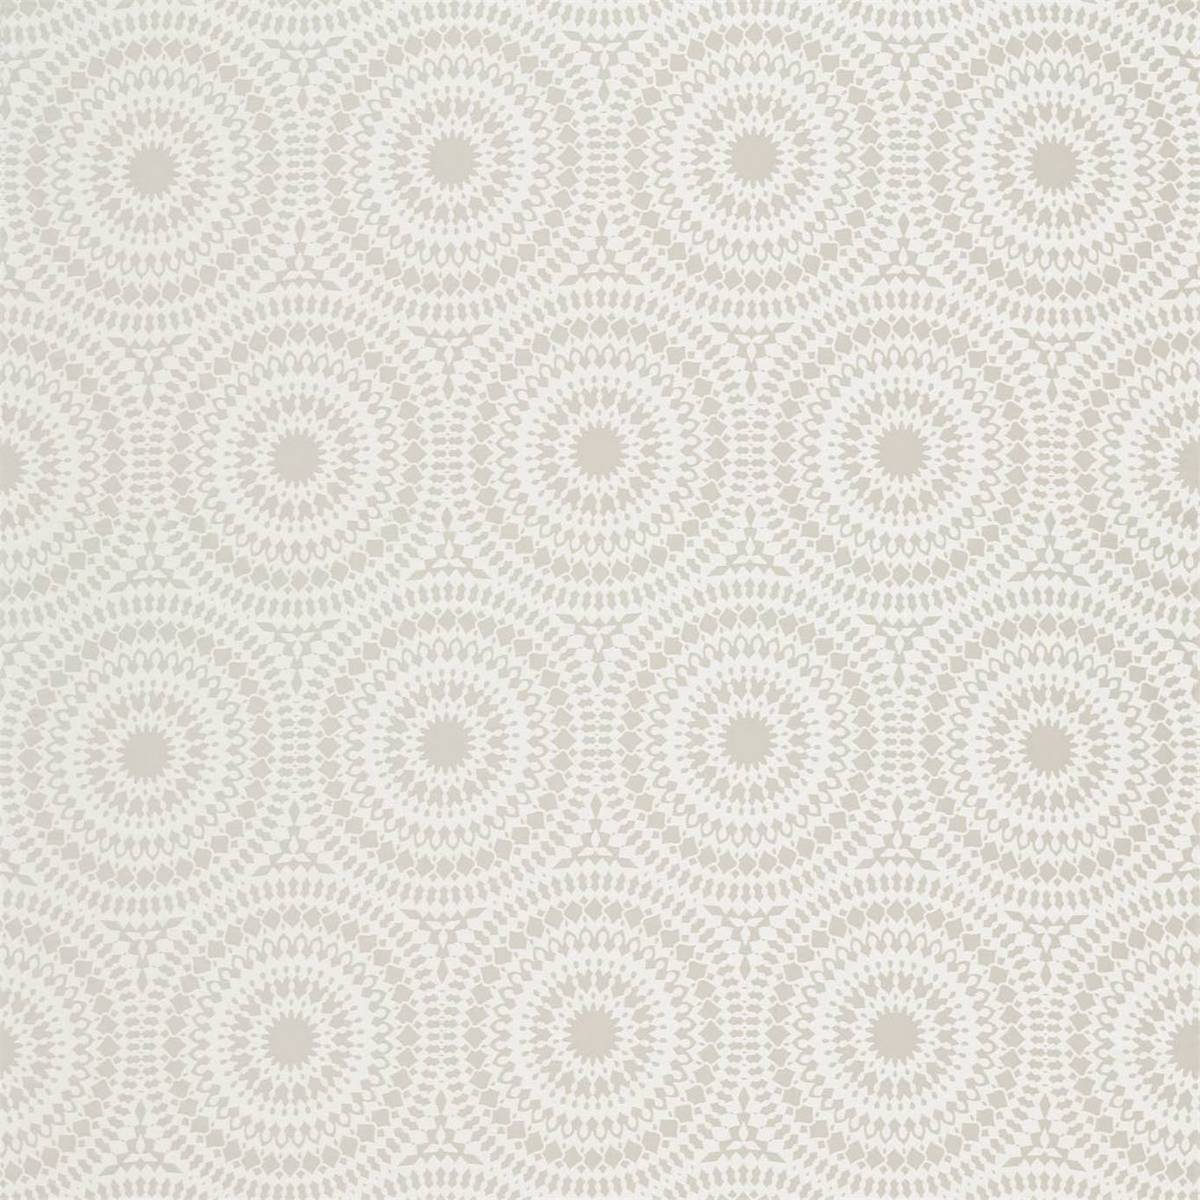 Cadencia Linen Fabric by Harlequin